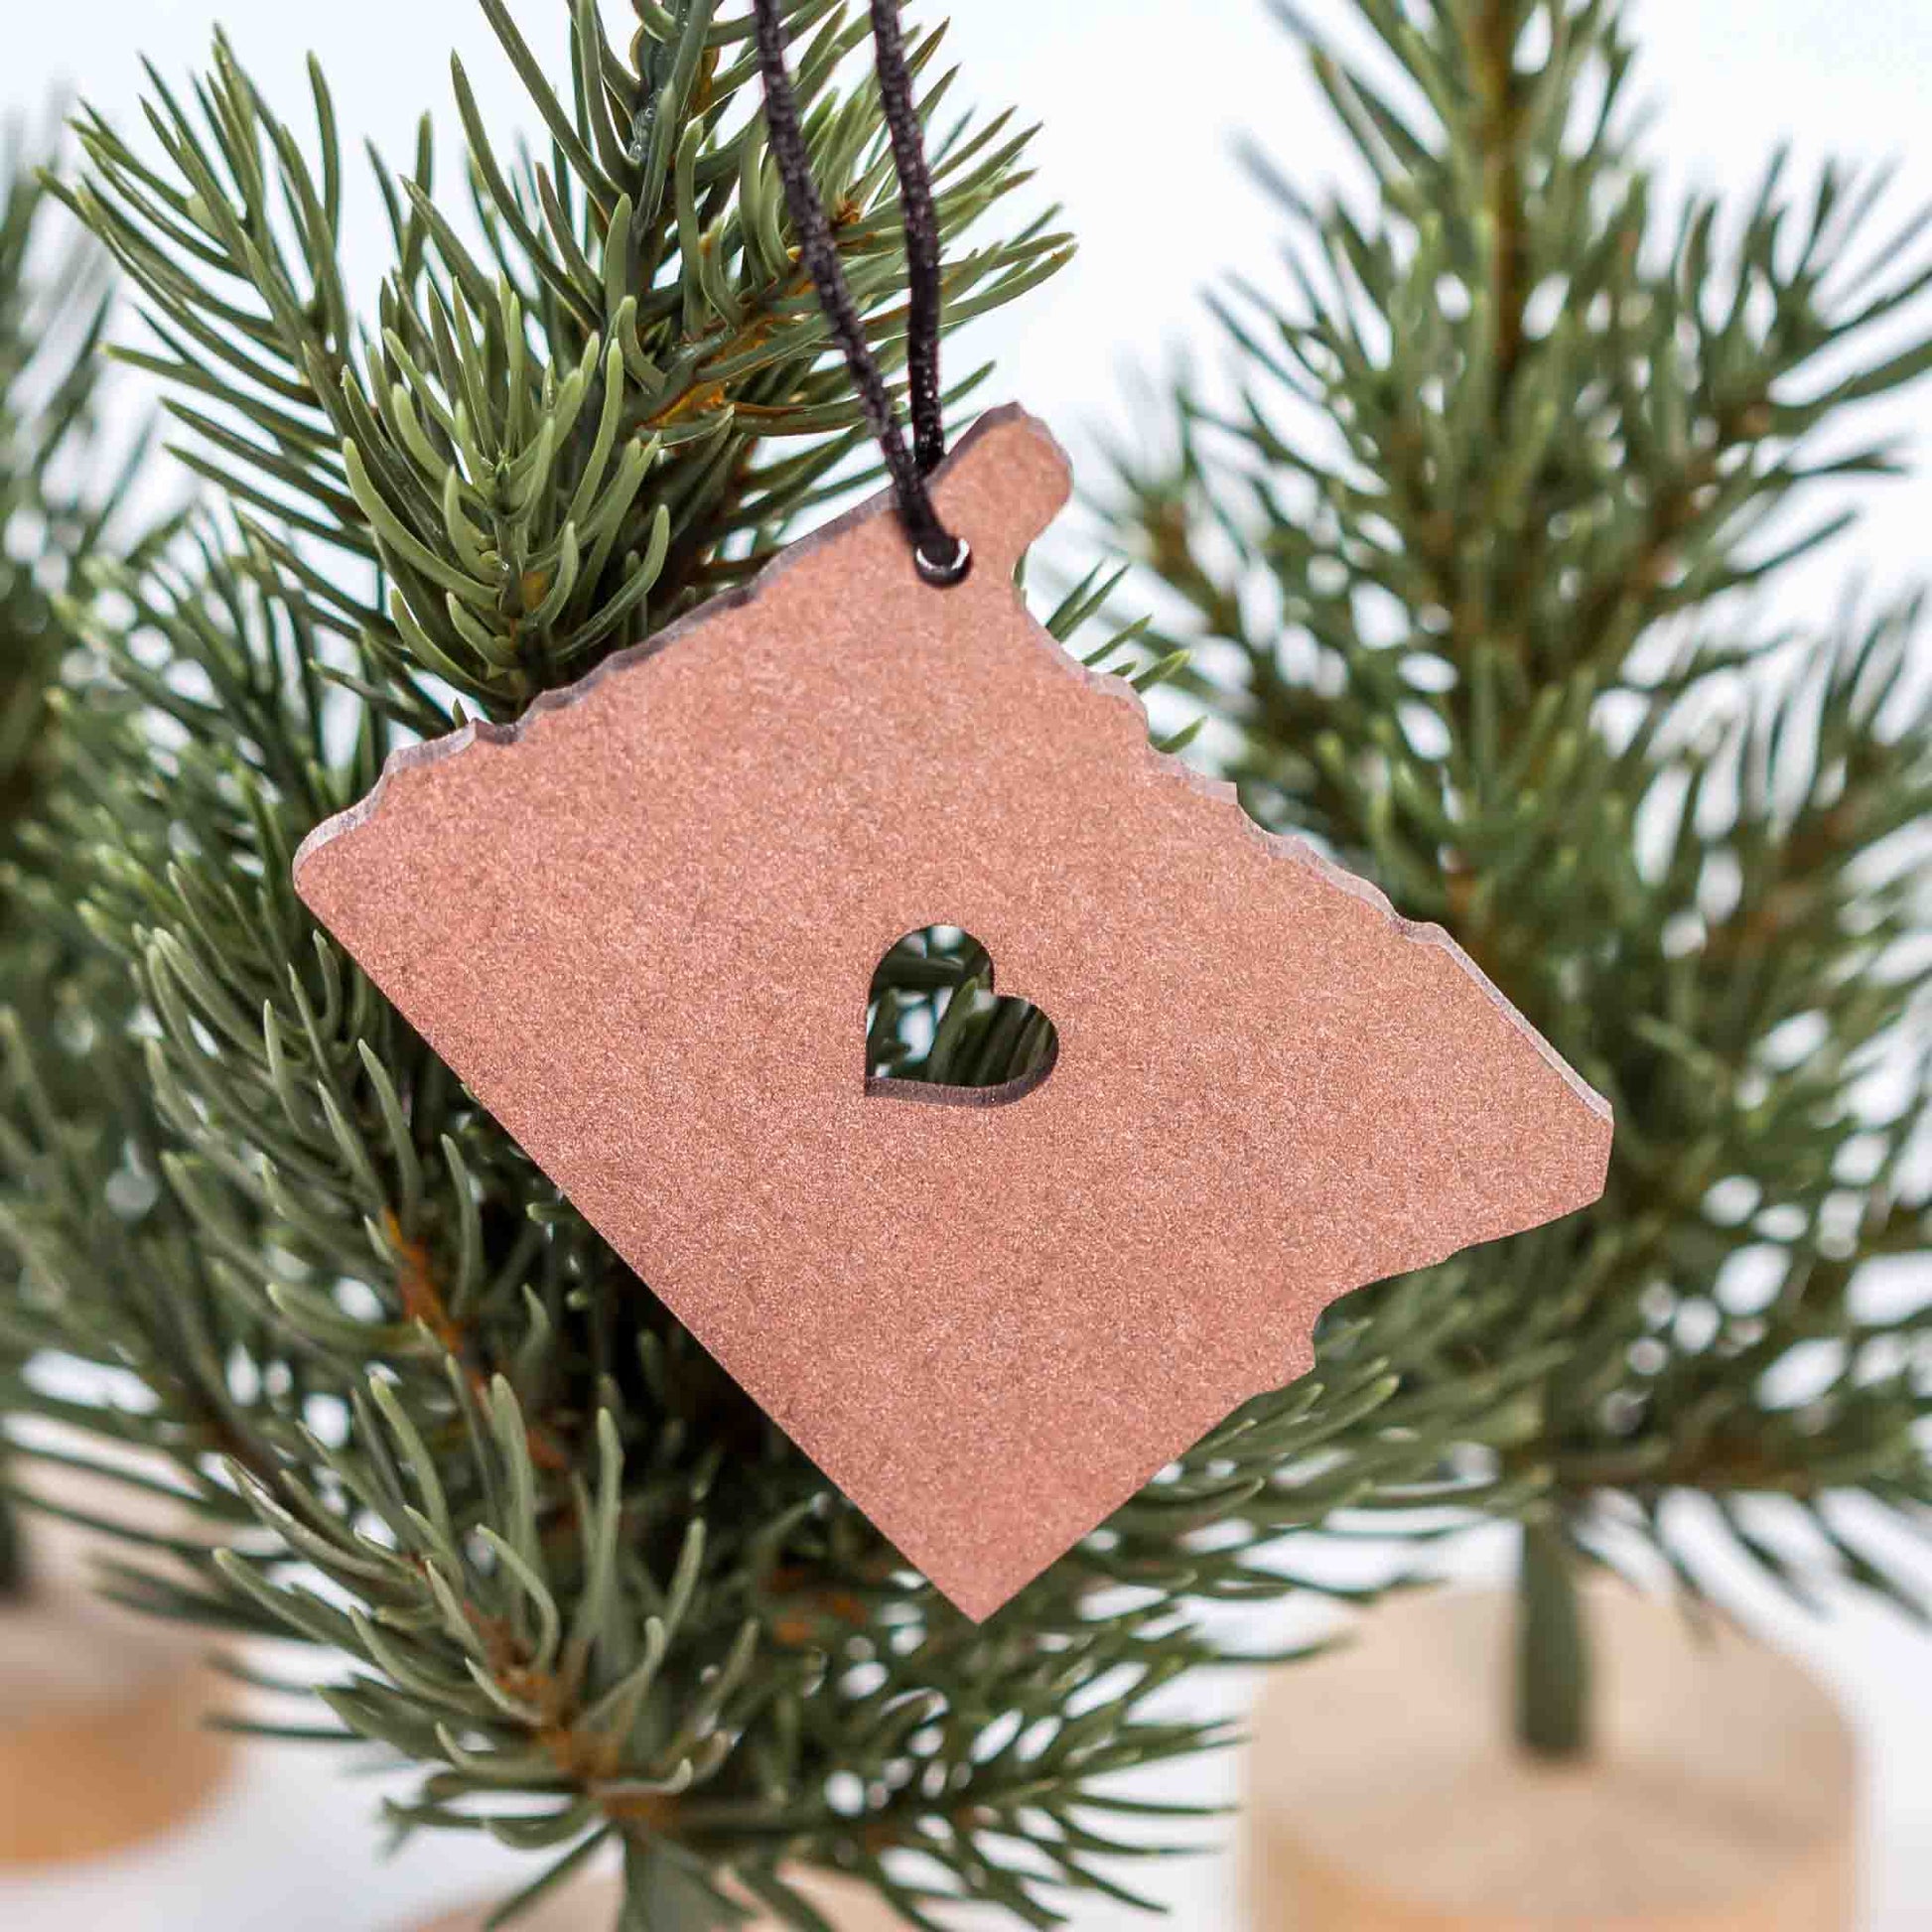 State Christmas Ornaments: Oregon Love in Metallic Rose Gold by LeeMo Designs in Bend, Oregon